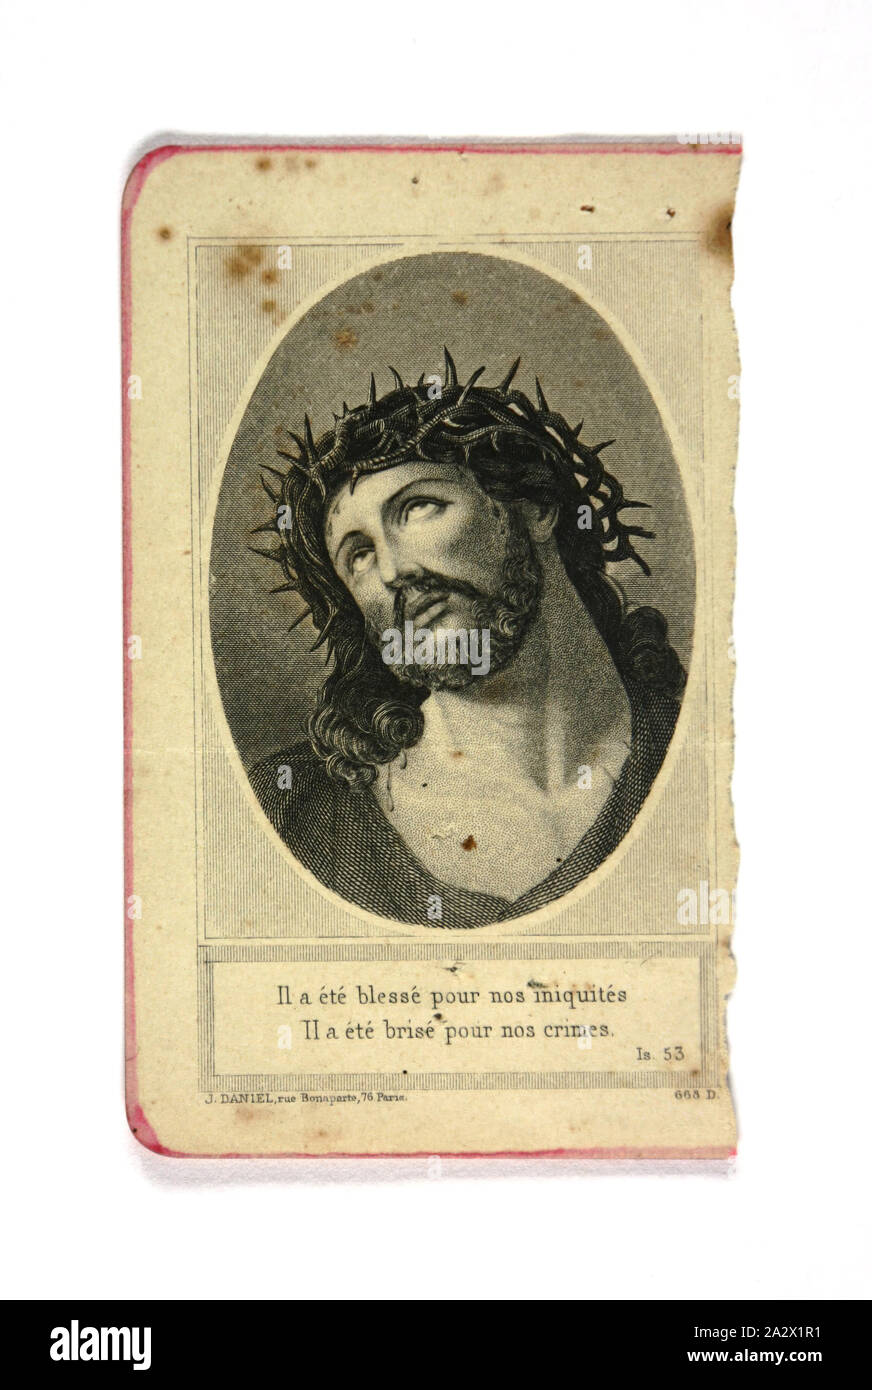 Page - Jesus, 'Il a Ete Blesse Pour Nos Iniquites', Likely World War I, 1916-1918, Alternative Name(s): Book Fragment, Card Page with illustration of Jesus with crown of thorns, apparently torn from a bible written in French. It is inscribed 'Il a ete blesse pour nos iniquites / Il a ete brise pour nos crimes' - translates roughly as 'He was wounded for our wickedness / He was broken for our wickedness'. Its likely owner was World War I soldier Private William Nairn, a deeply Stock Photo